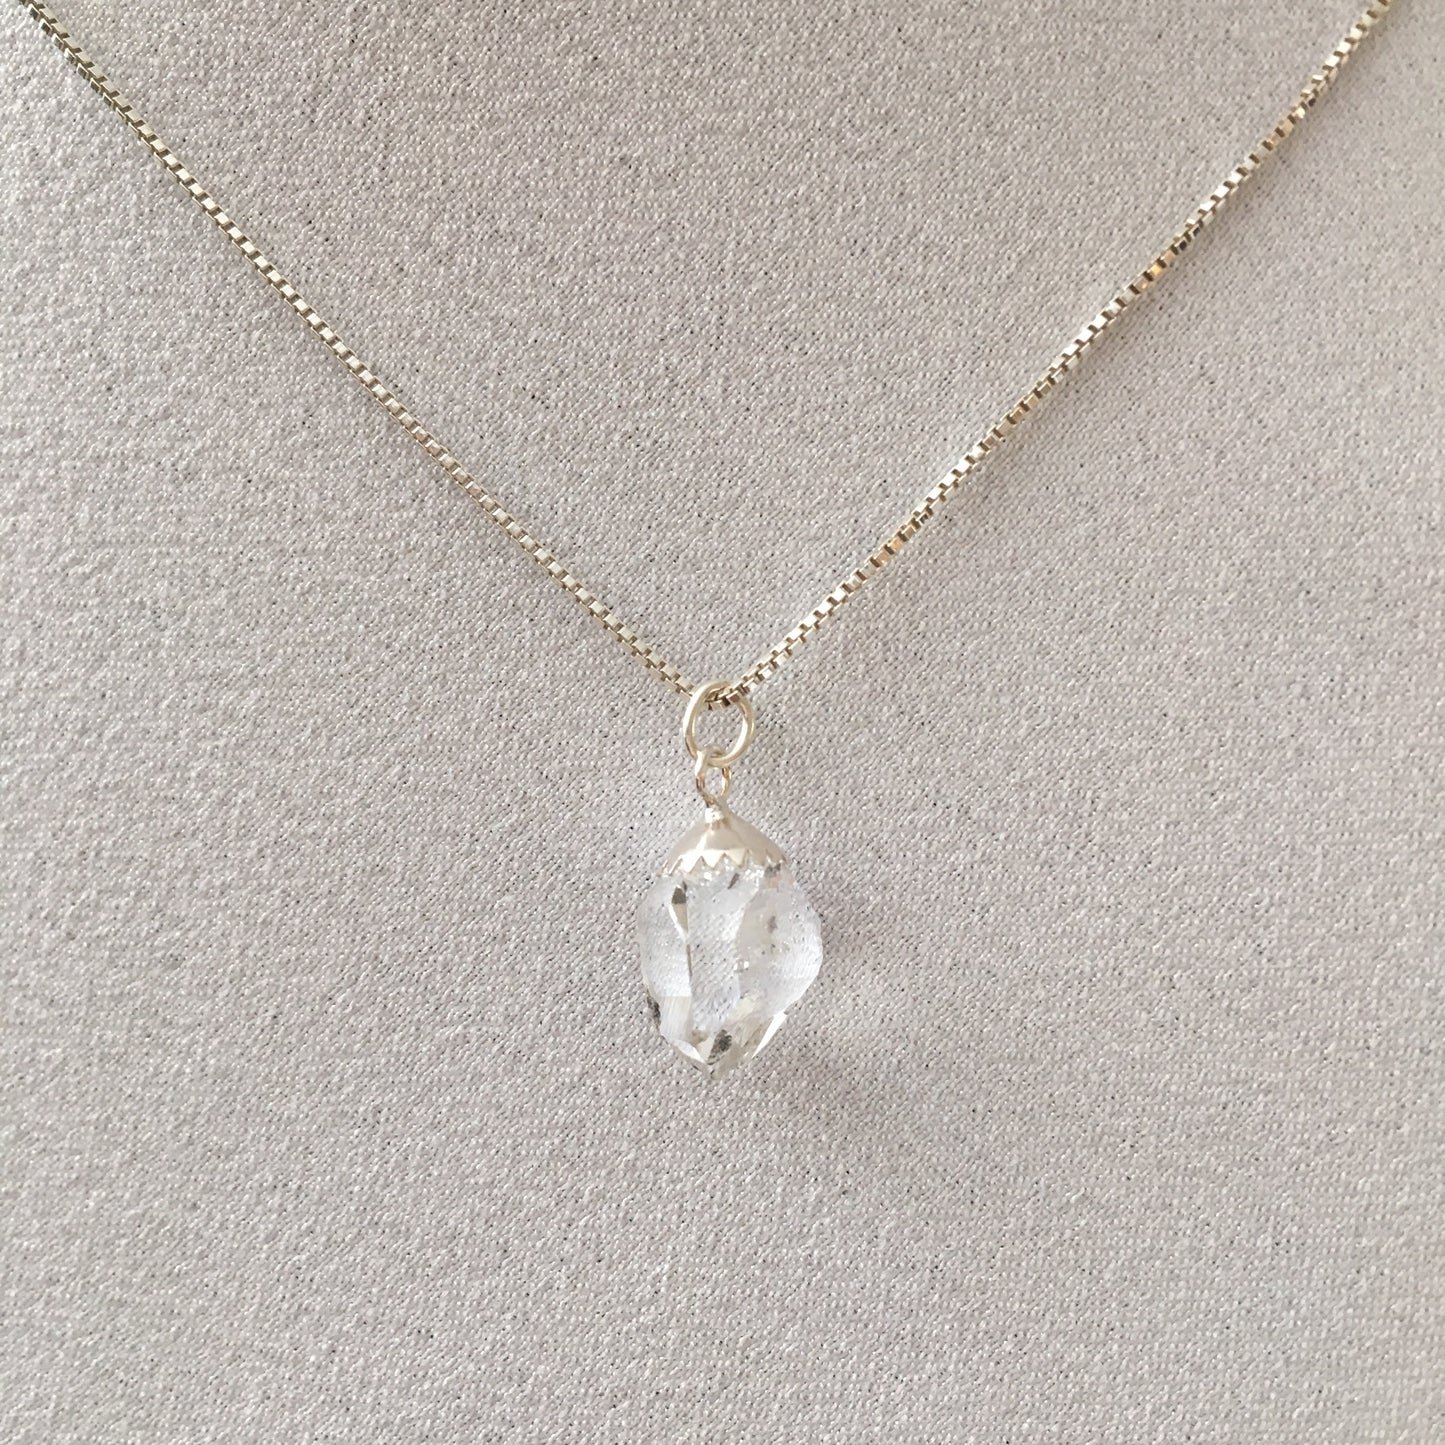 Herkimer Diamond 4.70 carat Sterling Silver Box Chain Necklace 